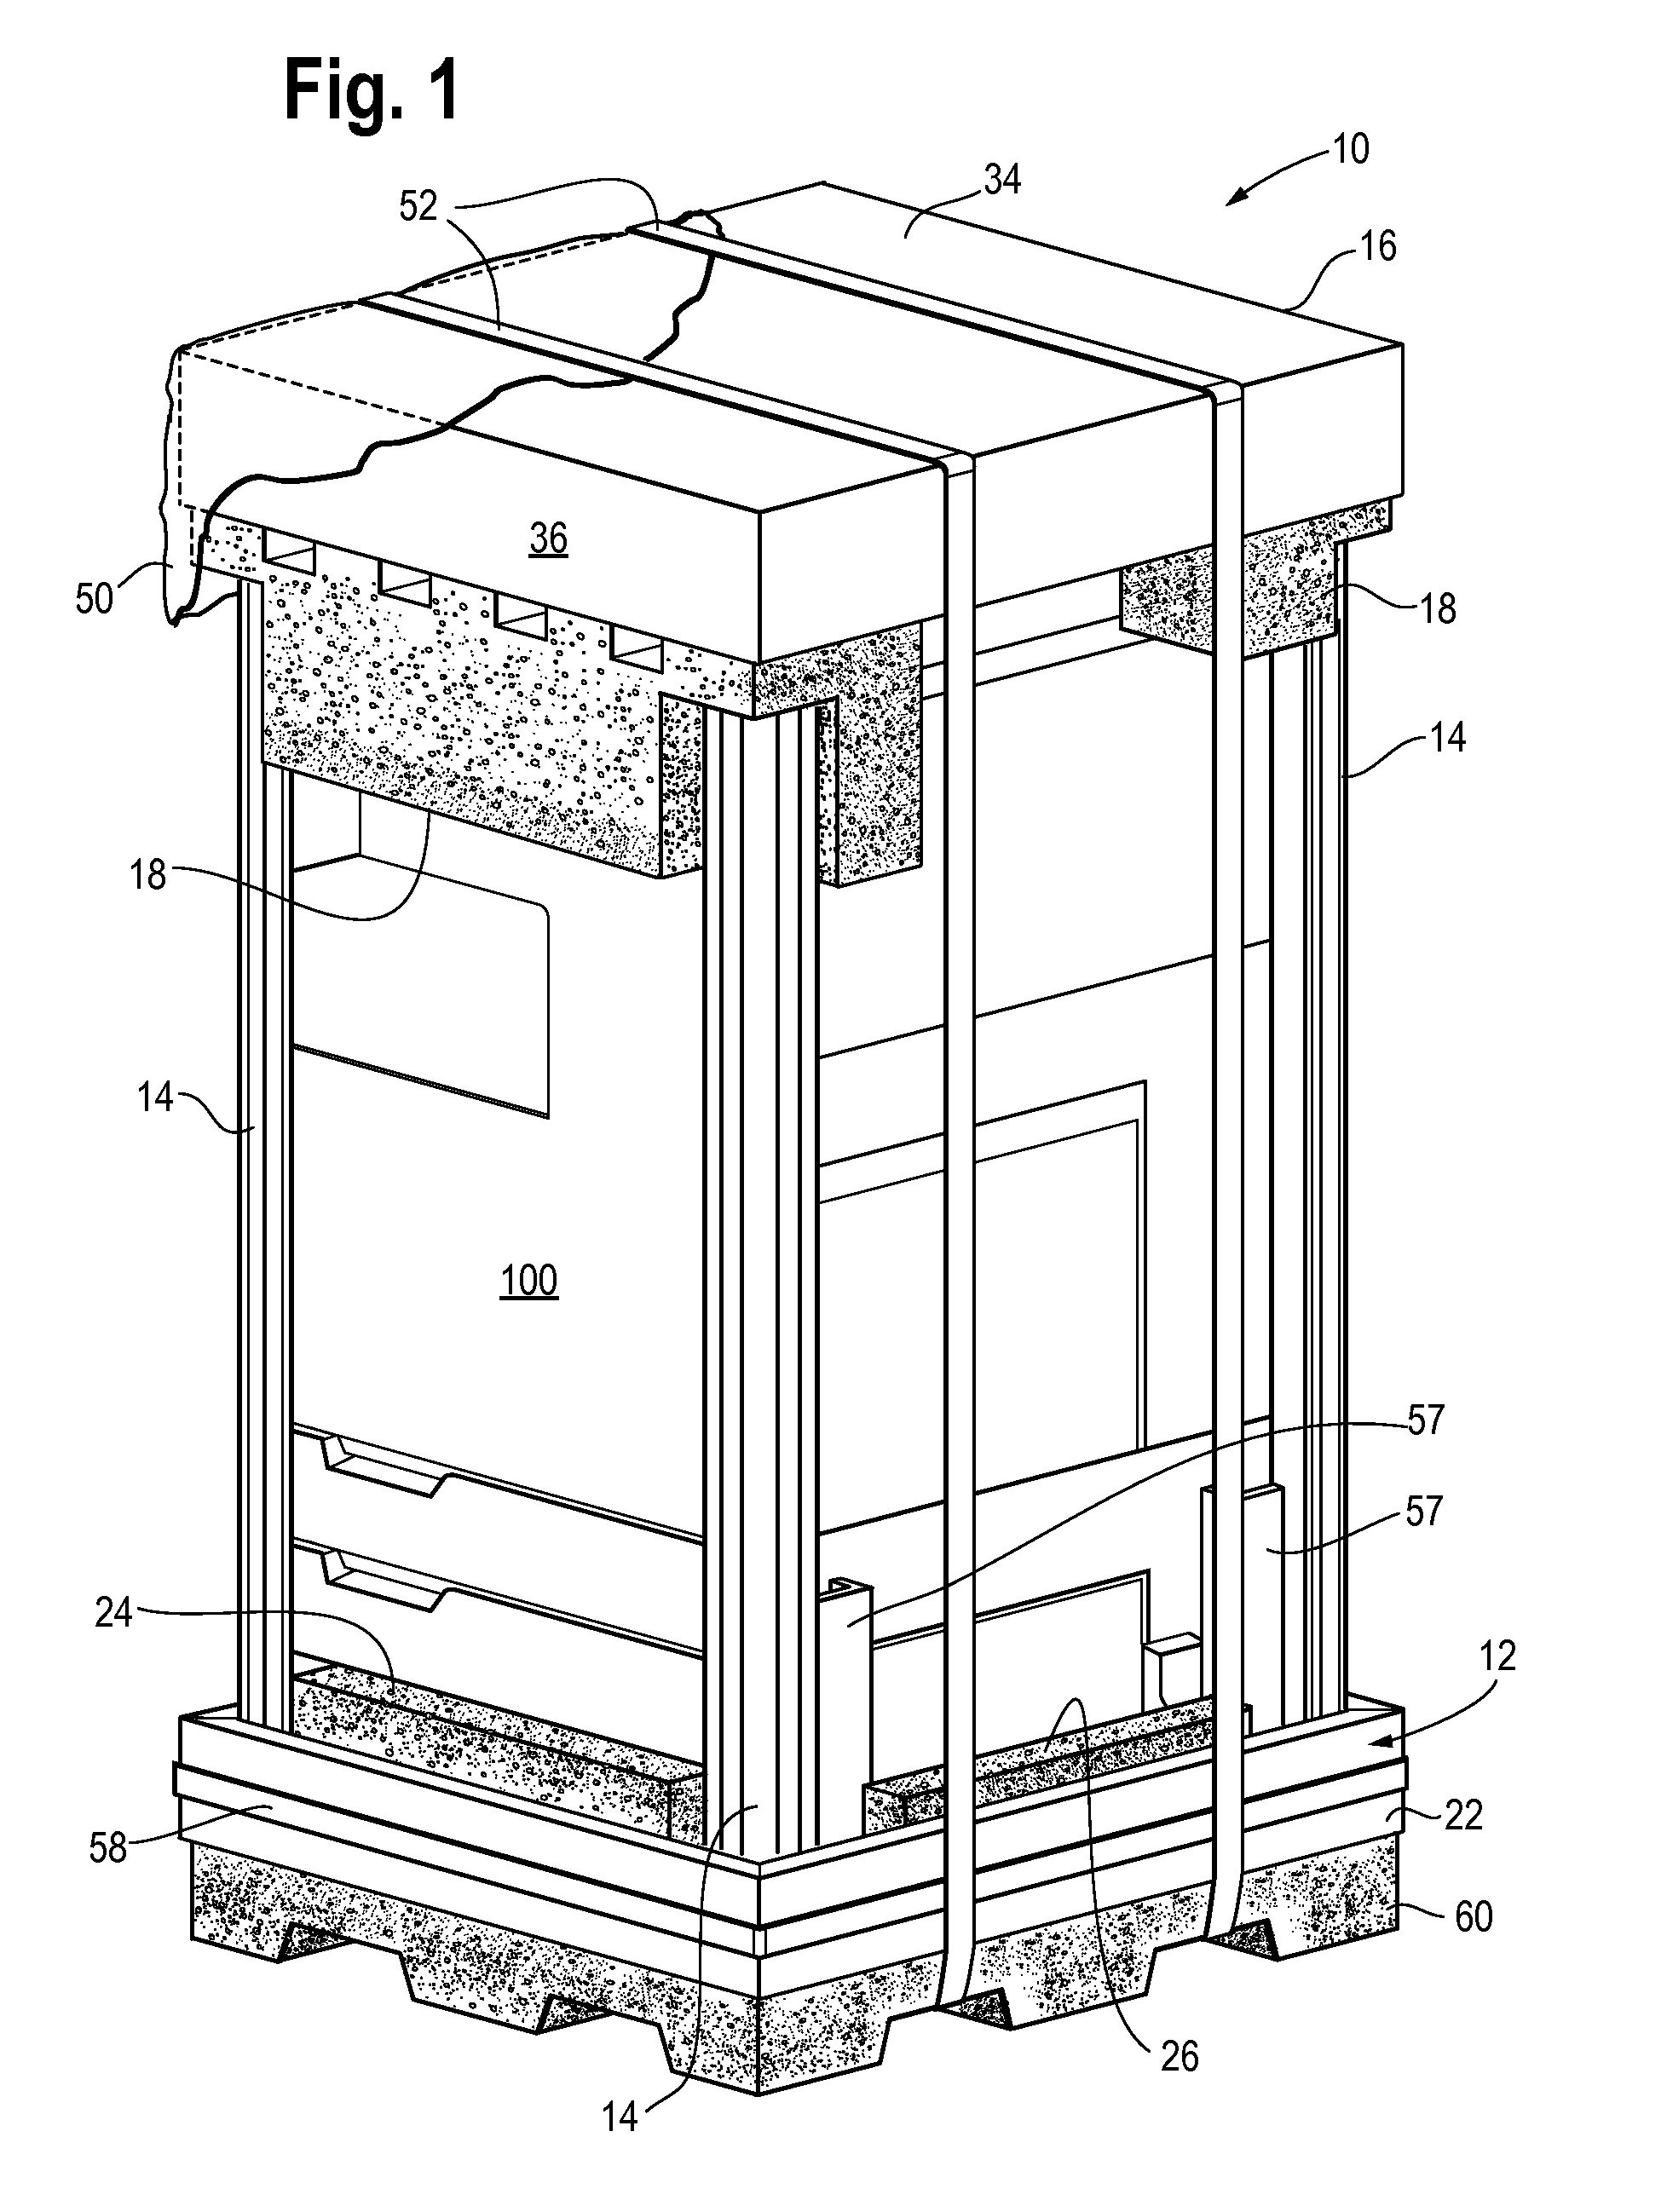 Packaging system for a large article